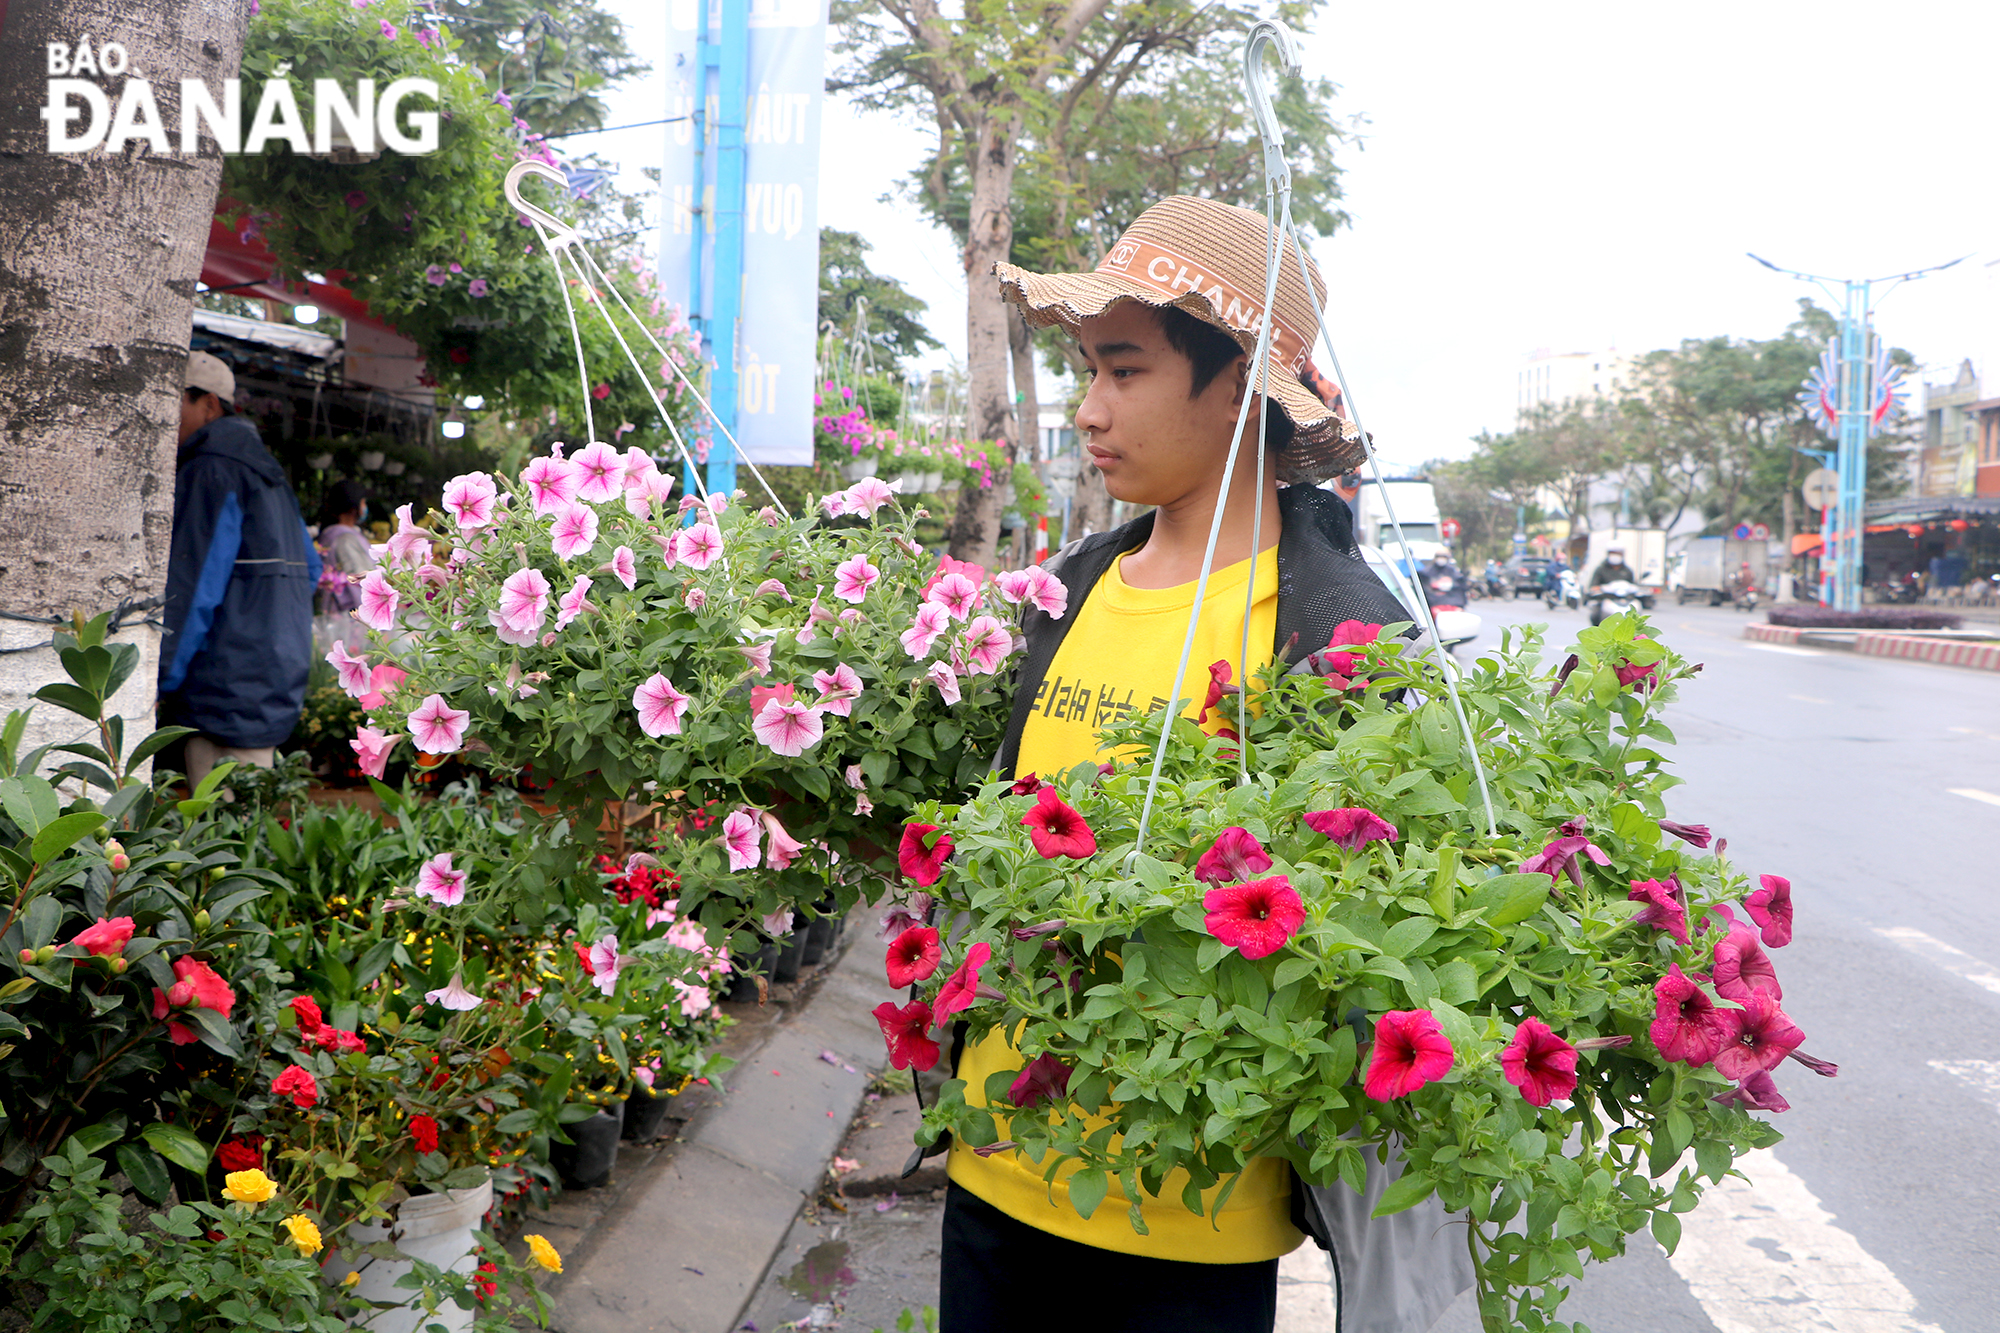 Many kinds of flowers are added by shops to meet people's needs during Tet.